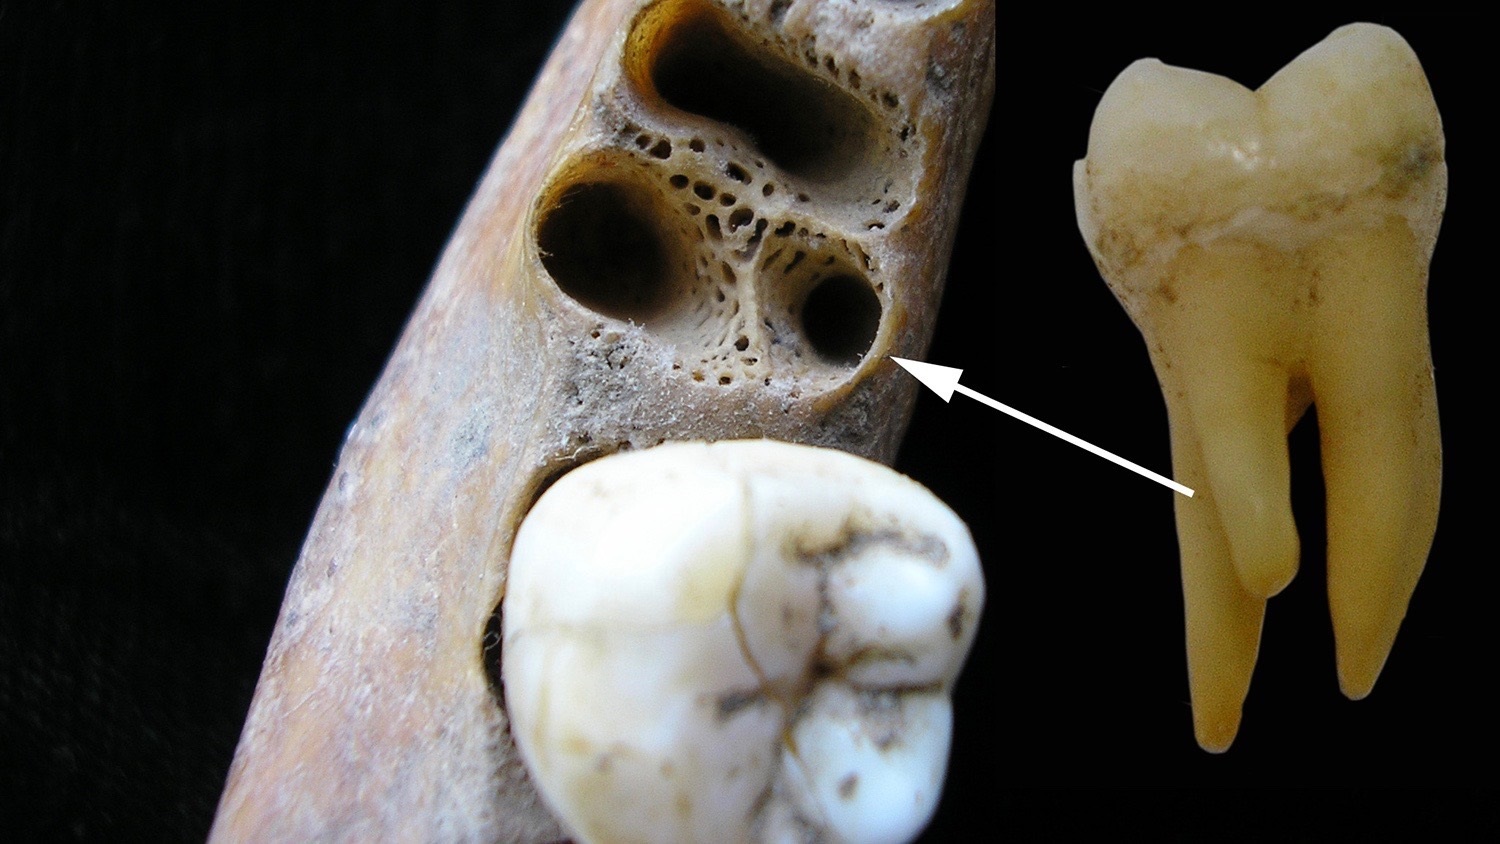 Three-rooted molars: A rare dental trait lives on